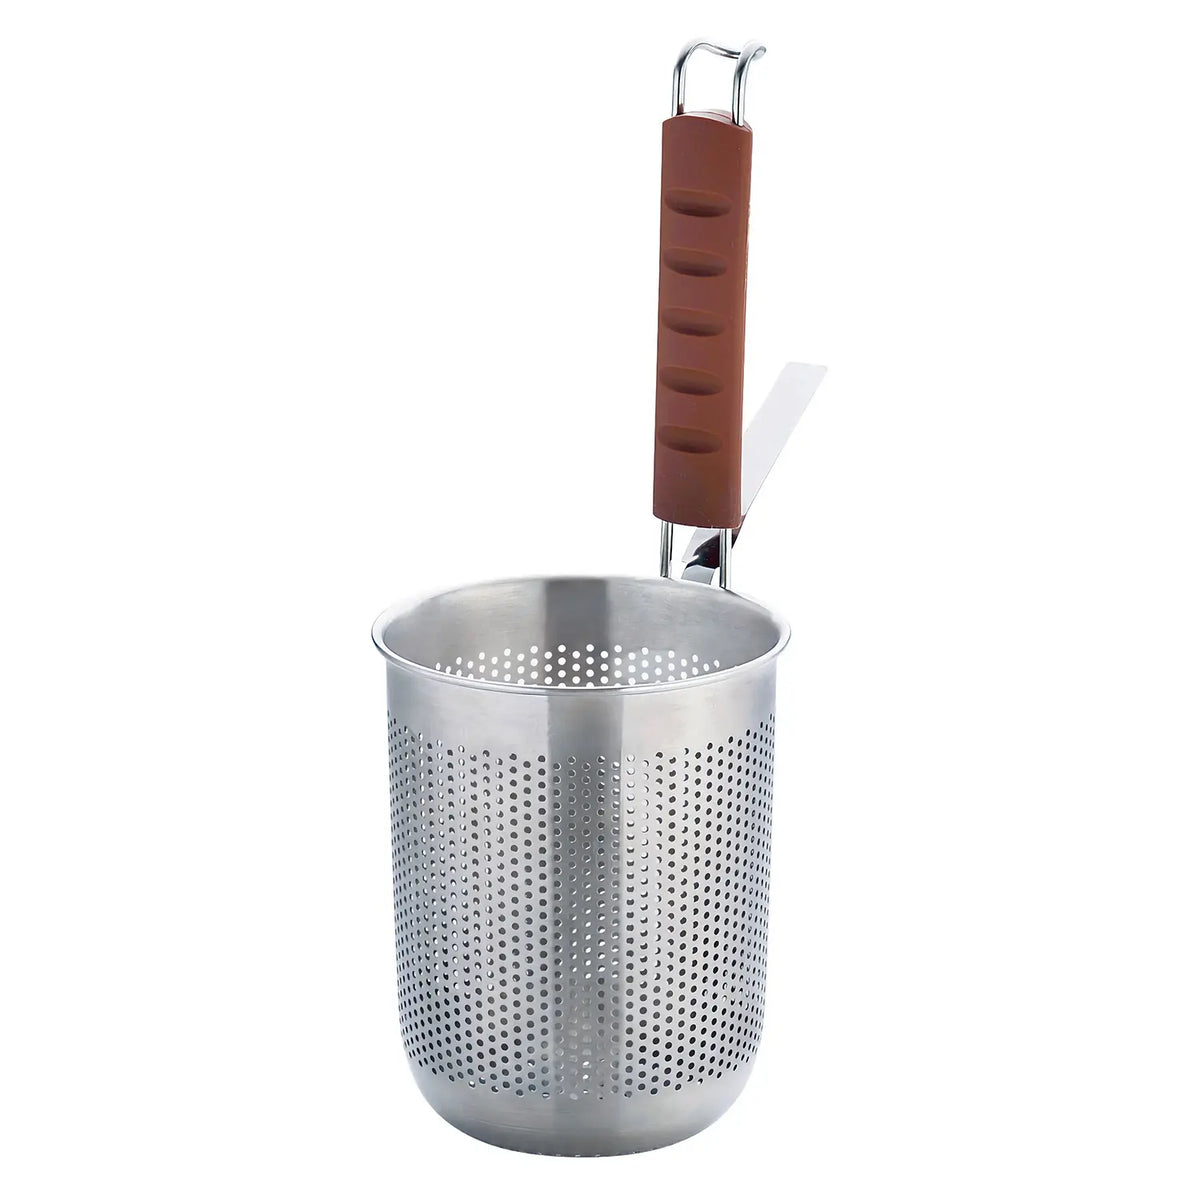 YUKIWA Stainless Steel Perforated Deep Tebo Noodle Strainer with Silicone Handle